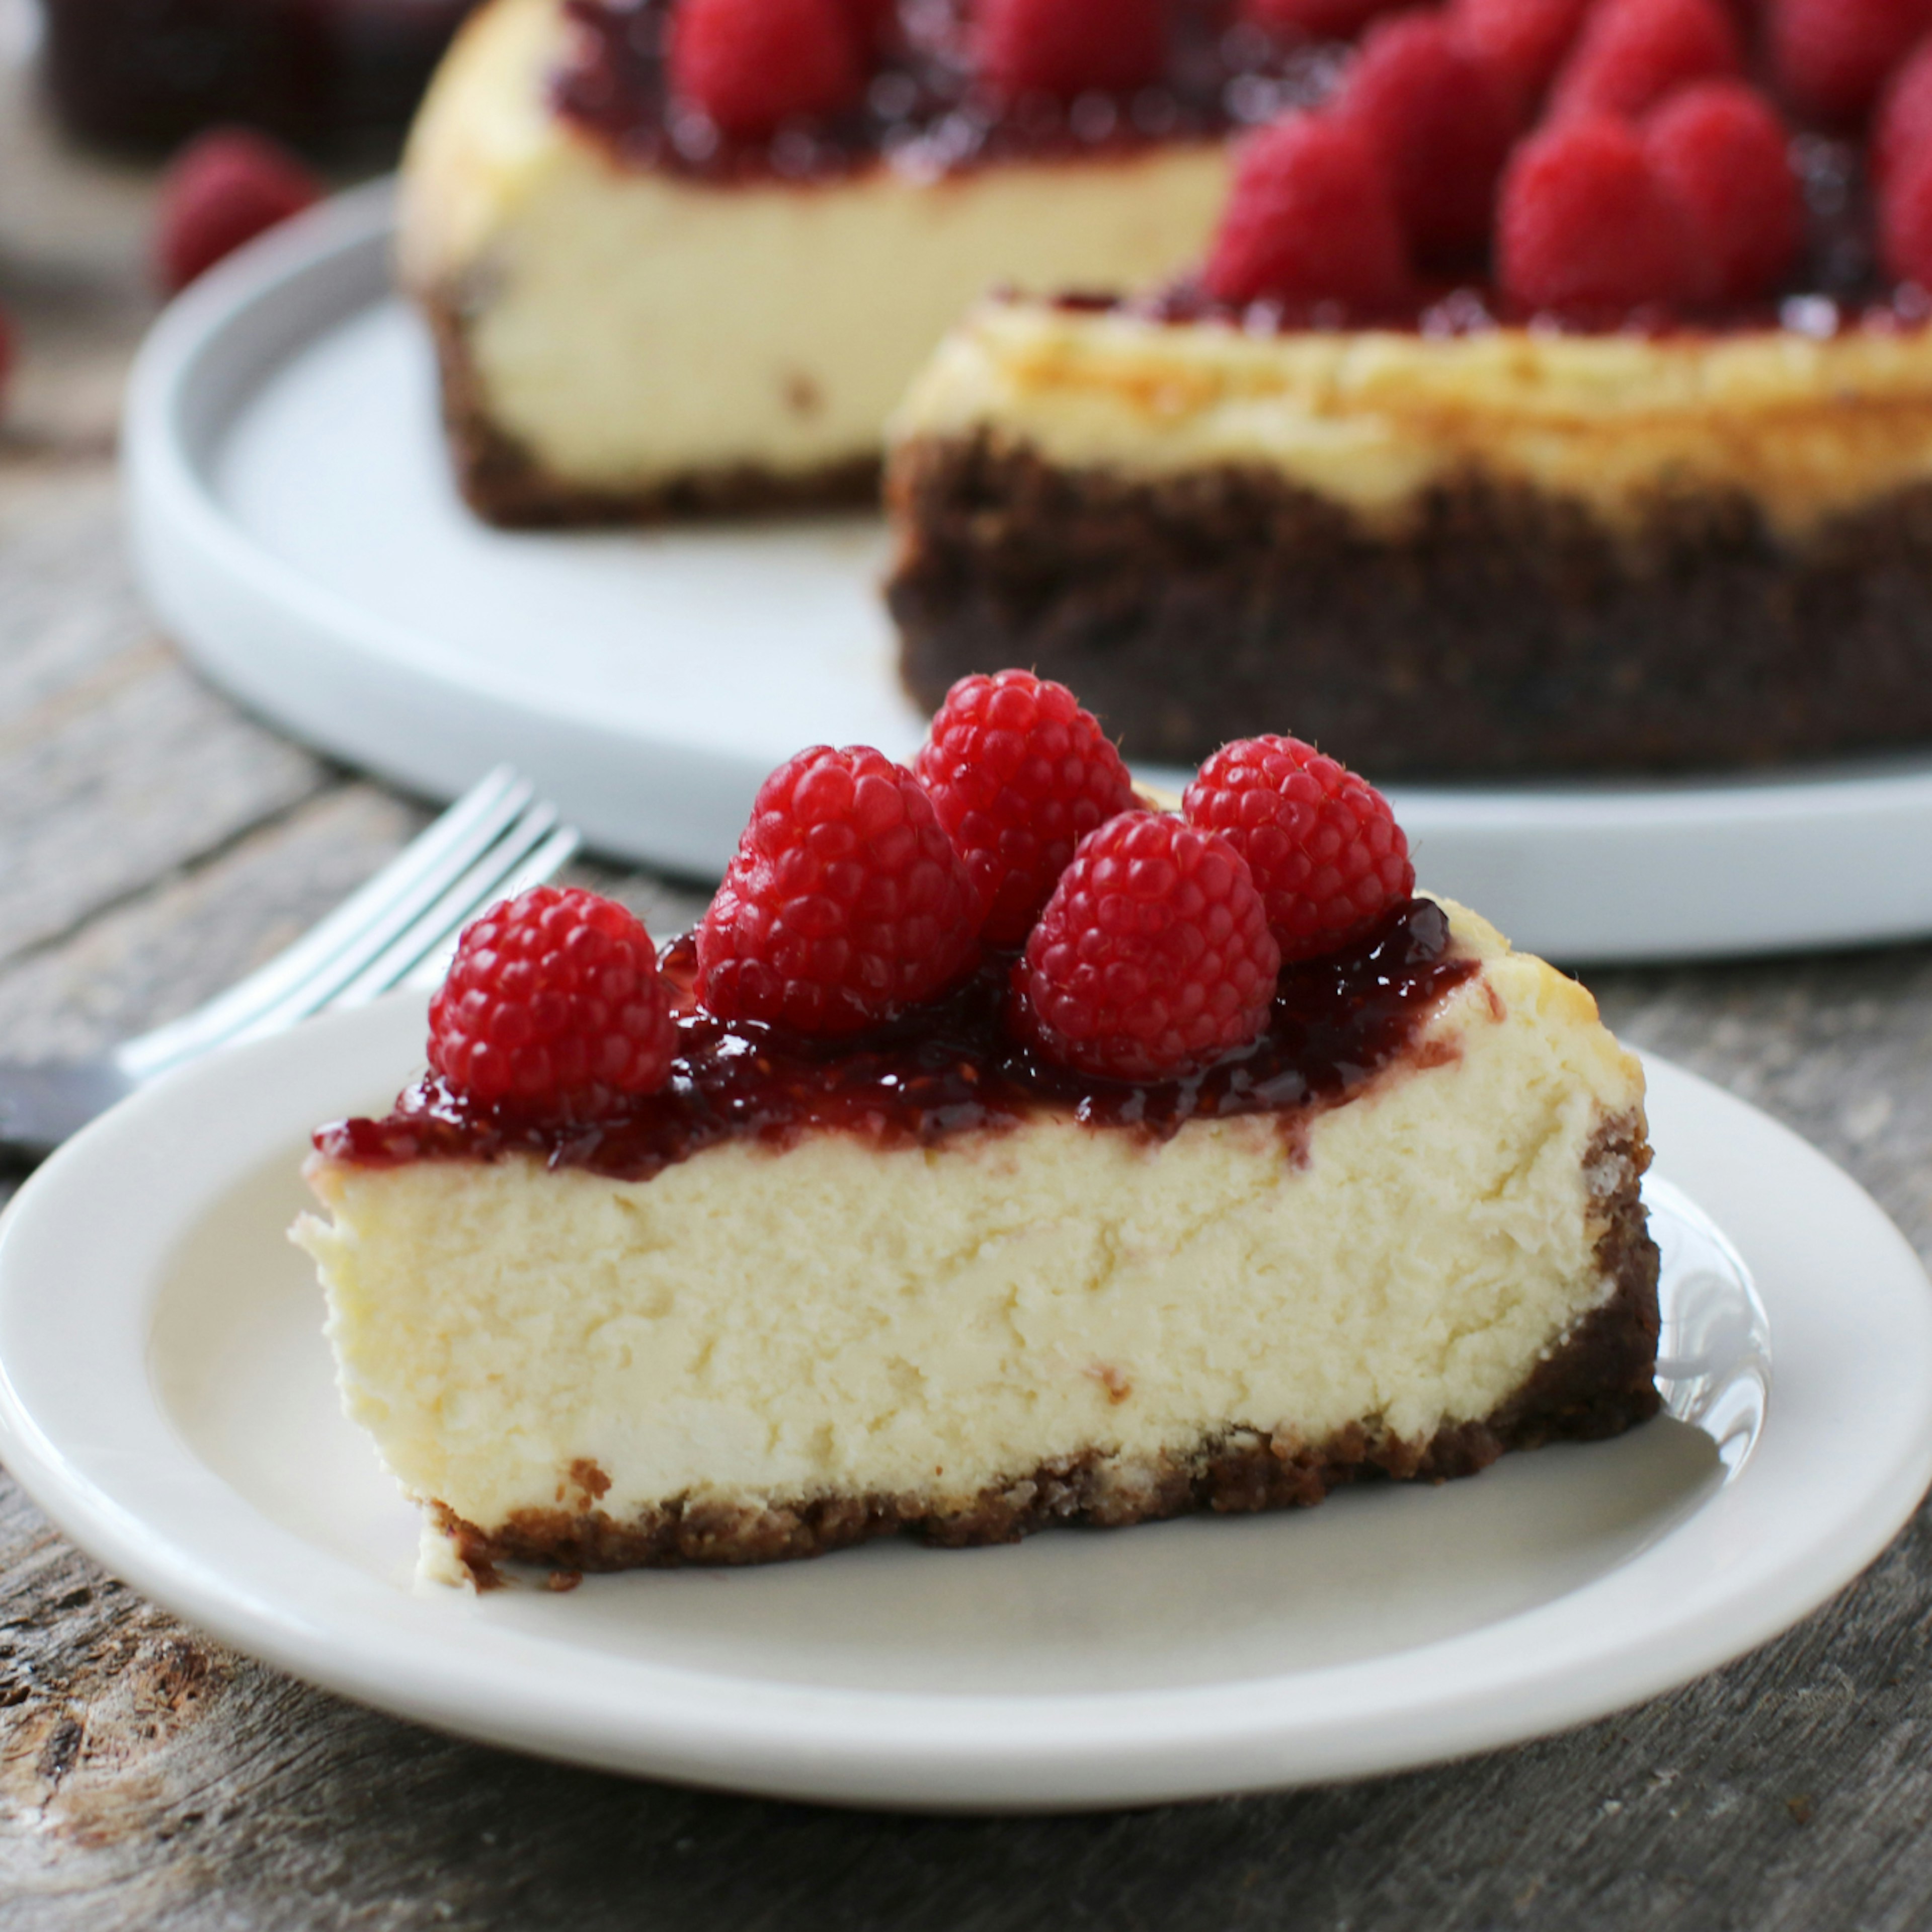 View item NY Style Goat Cheesecake with Raspberry Jam